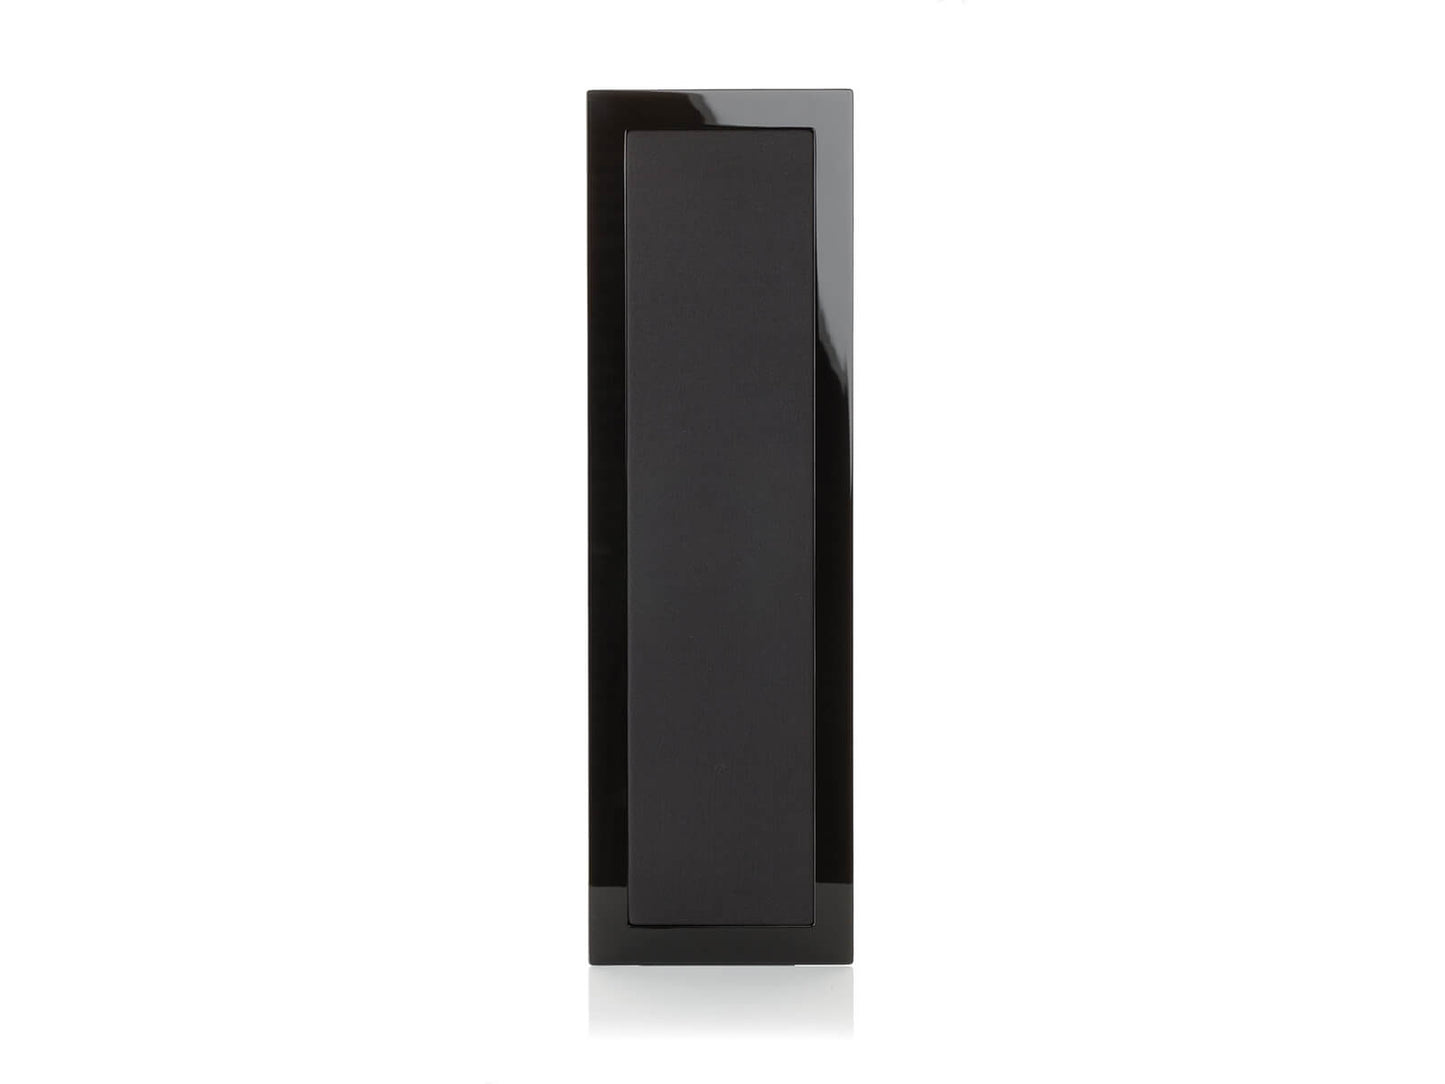 Products Monitor Audio SoundFrame 2 On-Wall Speaker